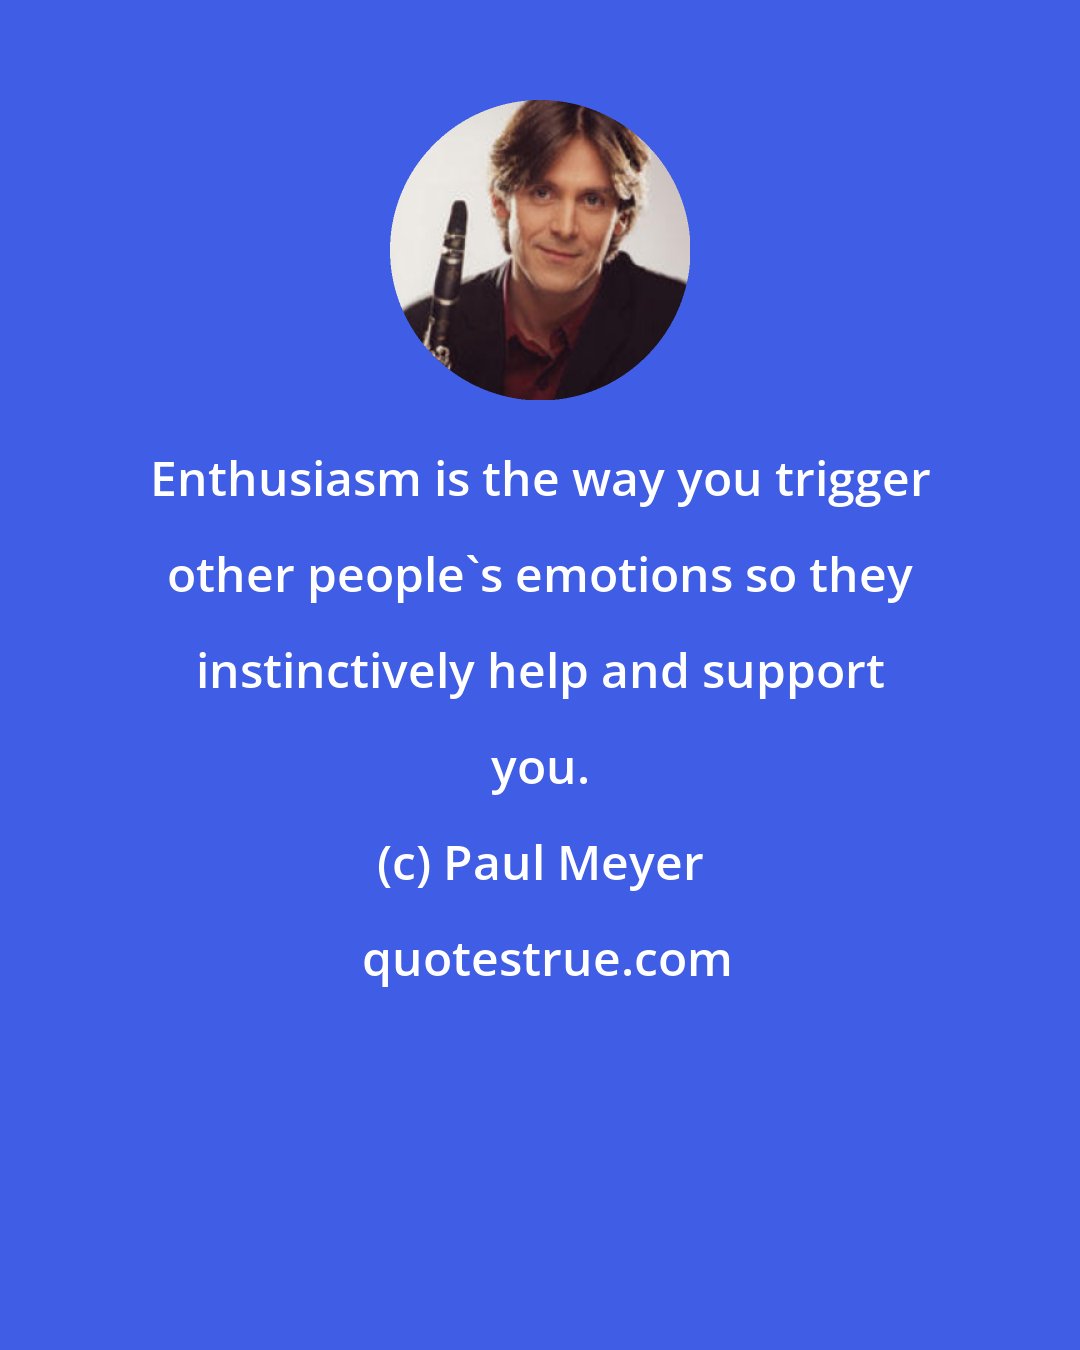 Paul Meyer: Enthusiasm is the way you trigger other people's emotions so they instinctively help and support you.